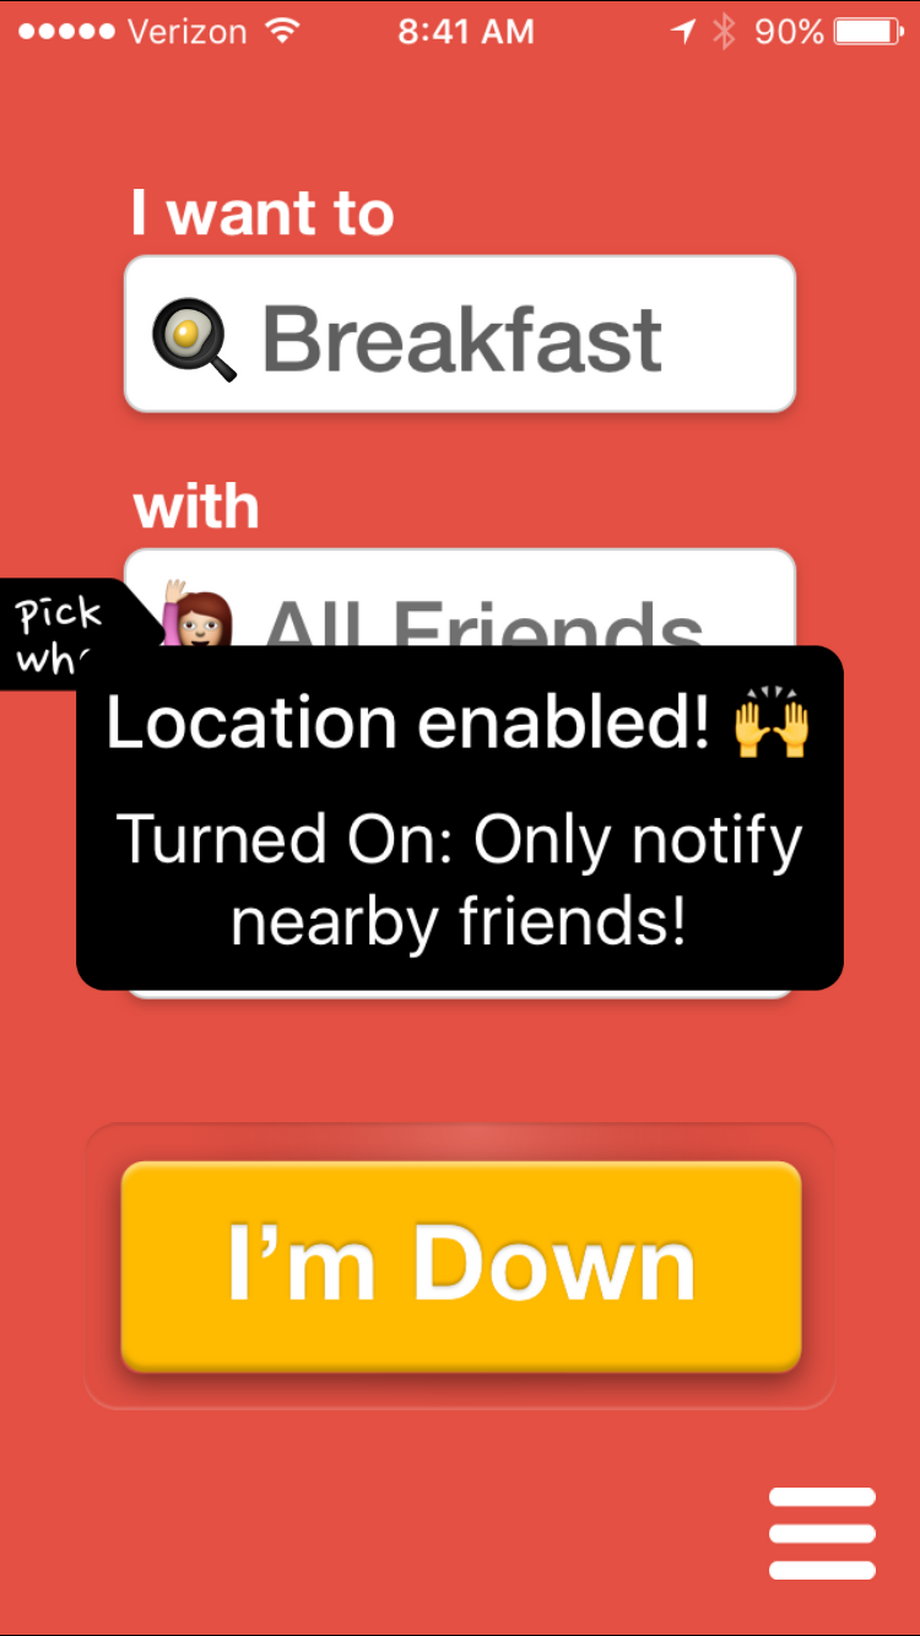 You can also turn location on so the app will only notify nearby friends.